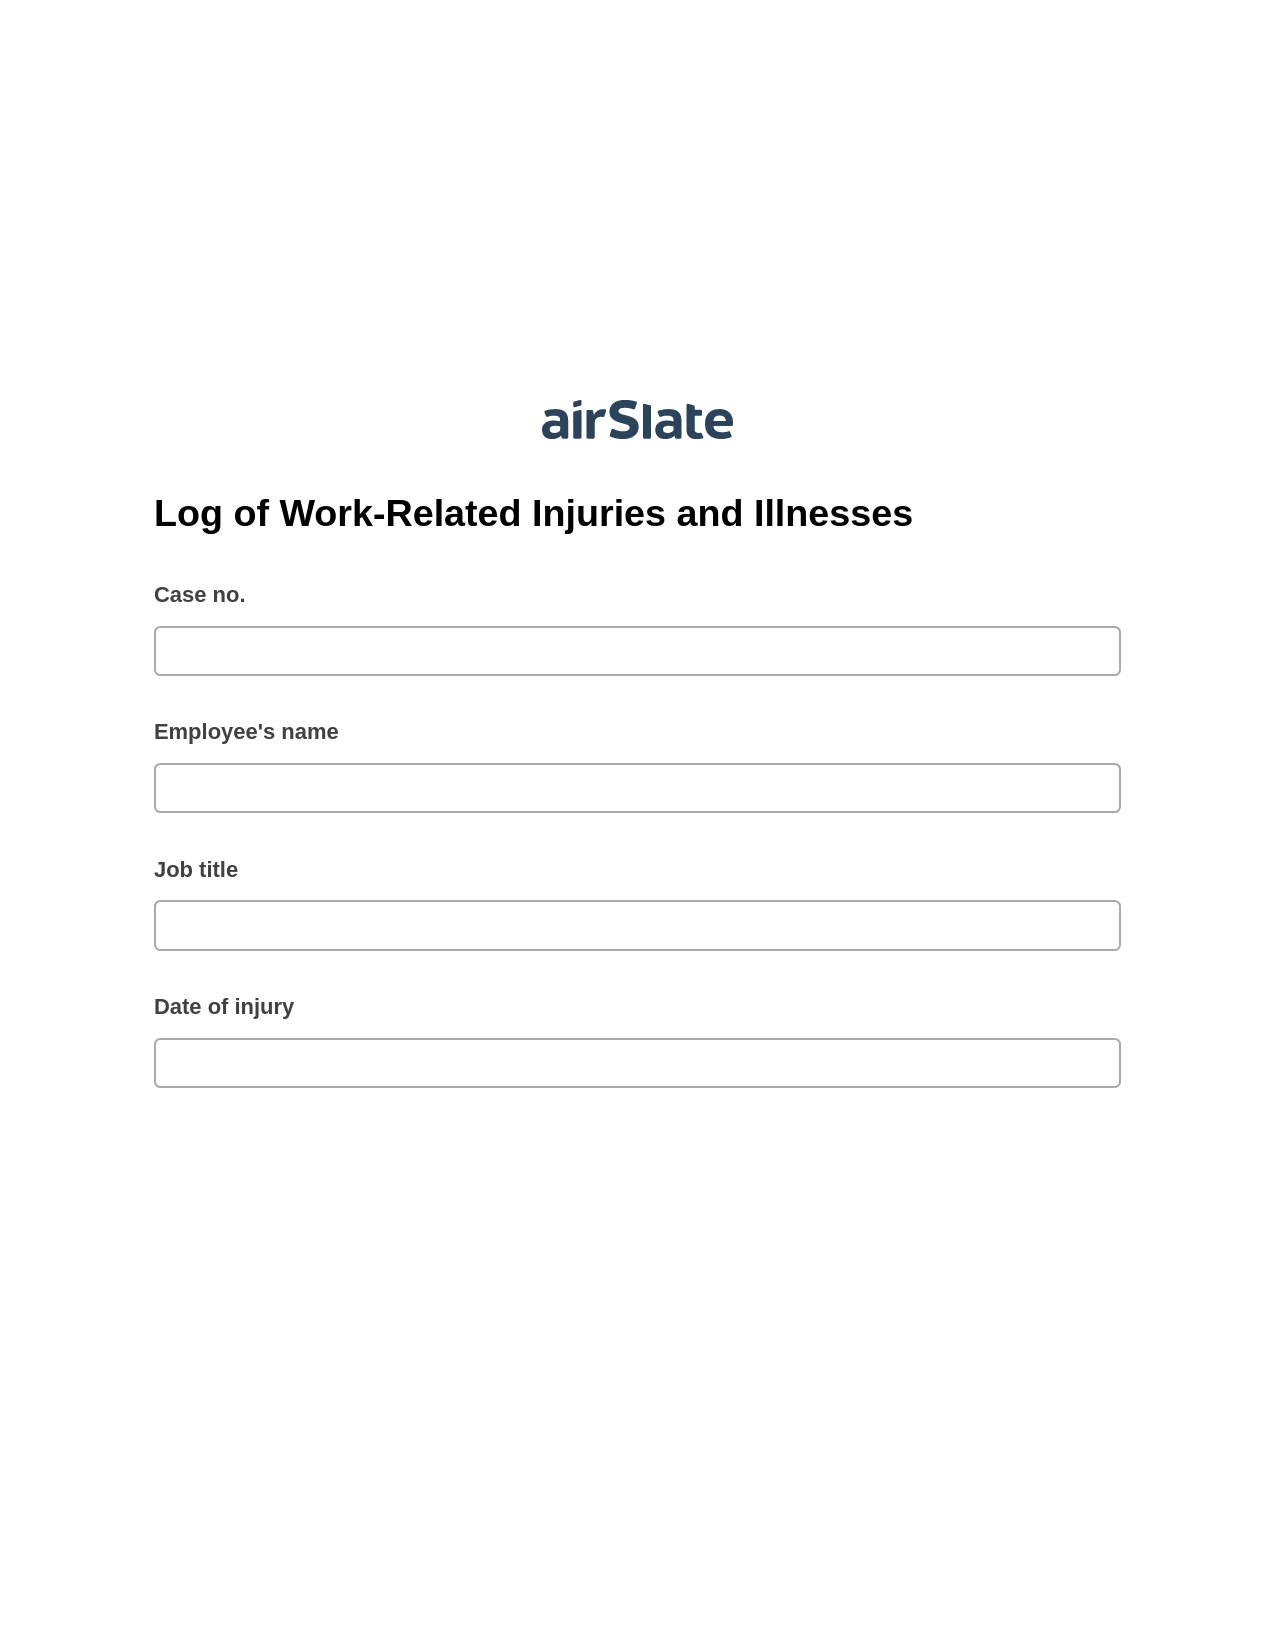 Log of Work-Related Injuries and Illnesses Pre-fill from Salesforce Record Bot, Set signature type addon, Export to Smartsheet